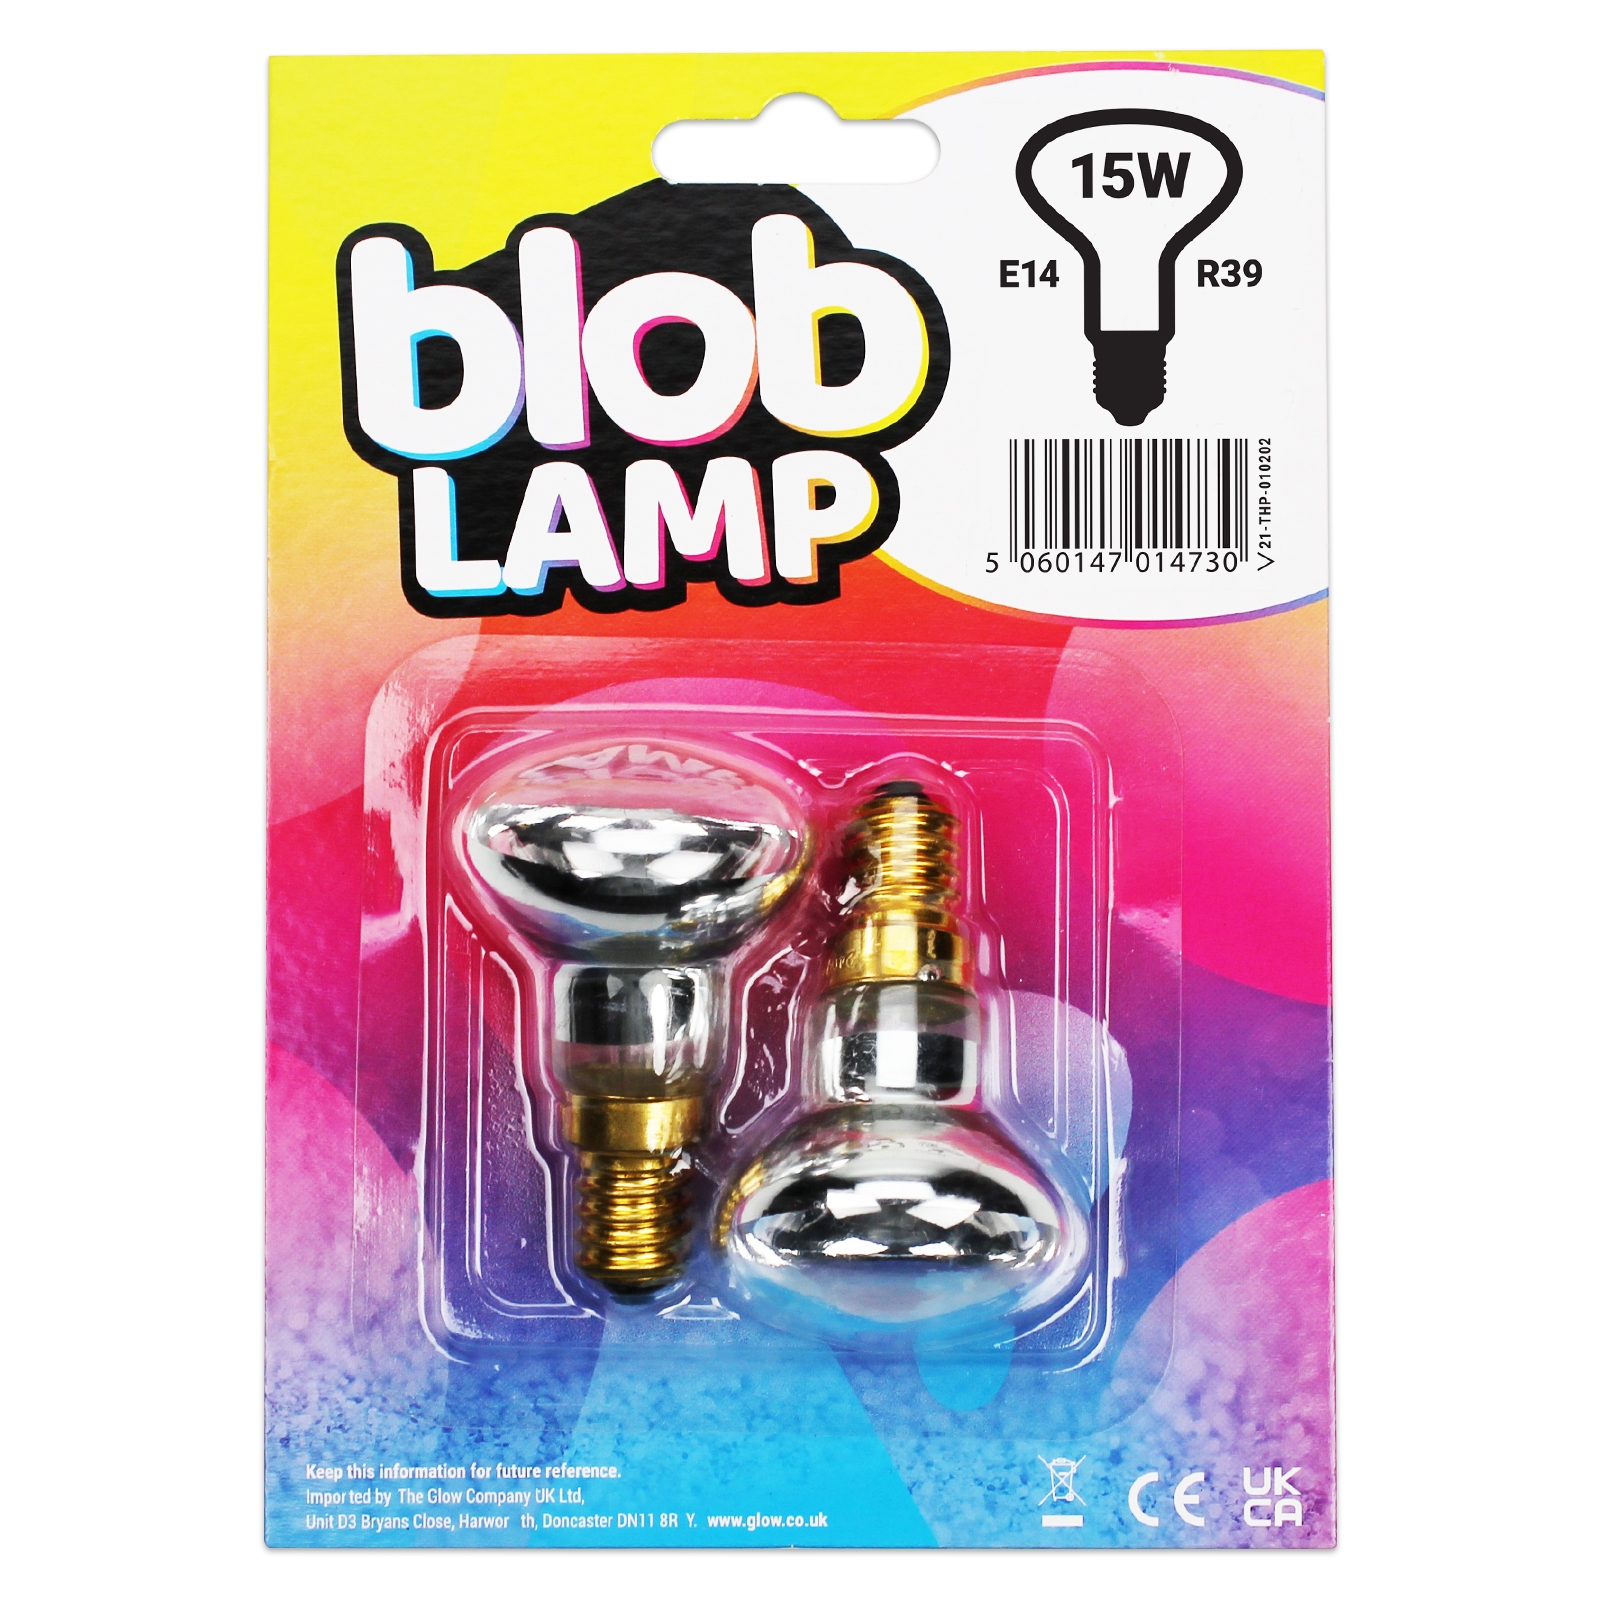 15w Replacement Blob Lava Lamp Bulbs E14 R39 Twin Pack